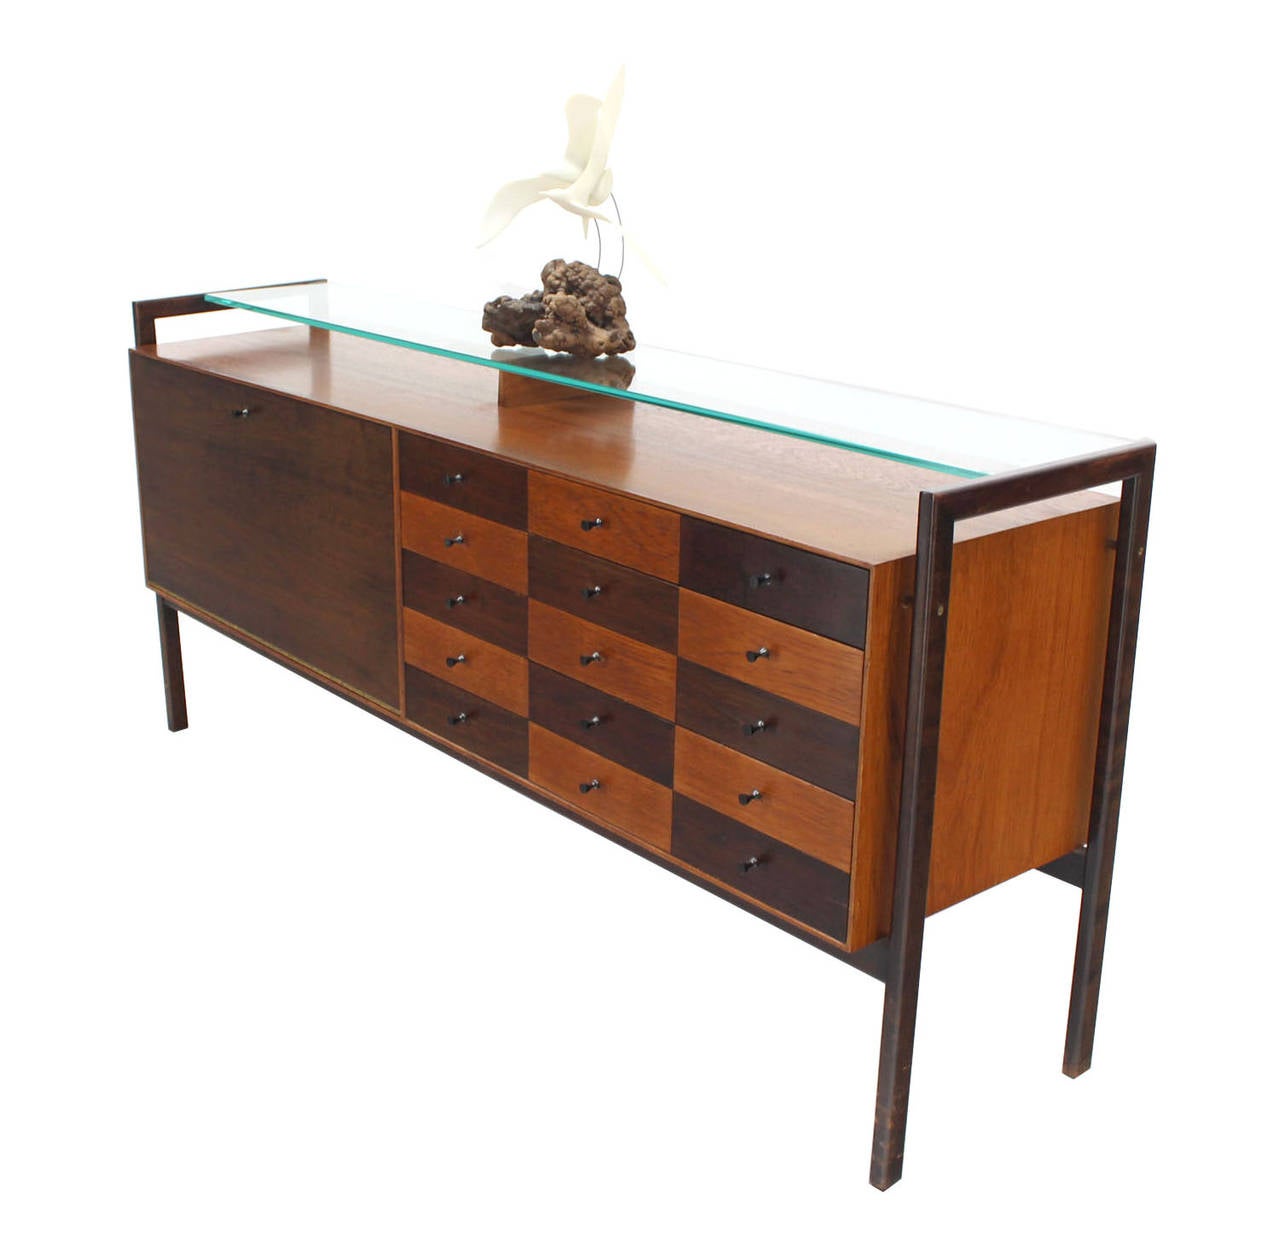 Very unusual glass shelf feature Mid-Century Modern multi drawer long dresser with drop front record or file compartment.